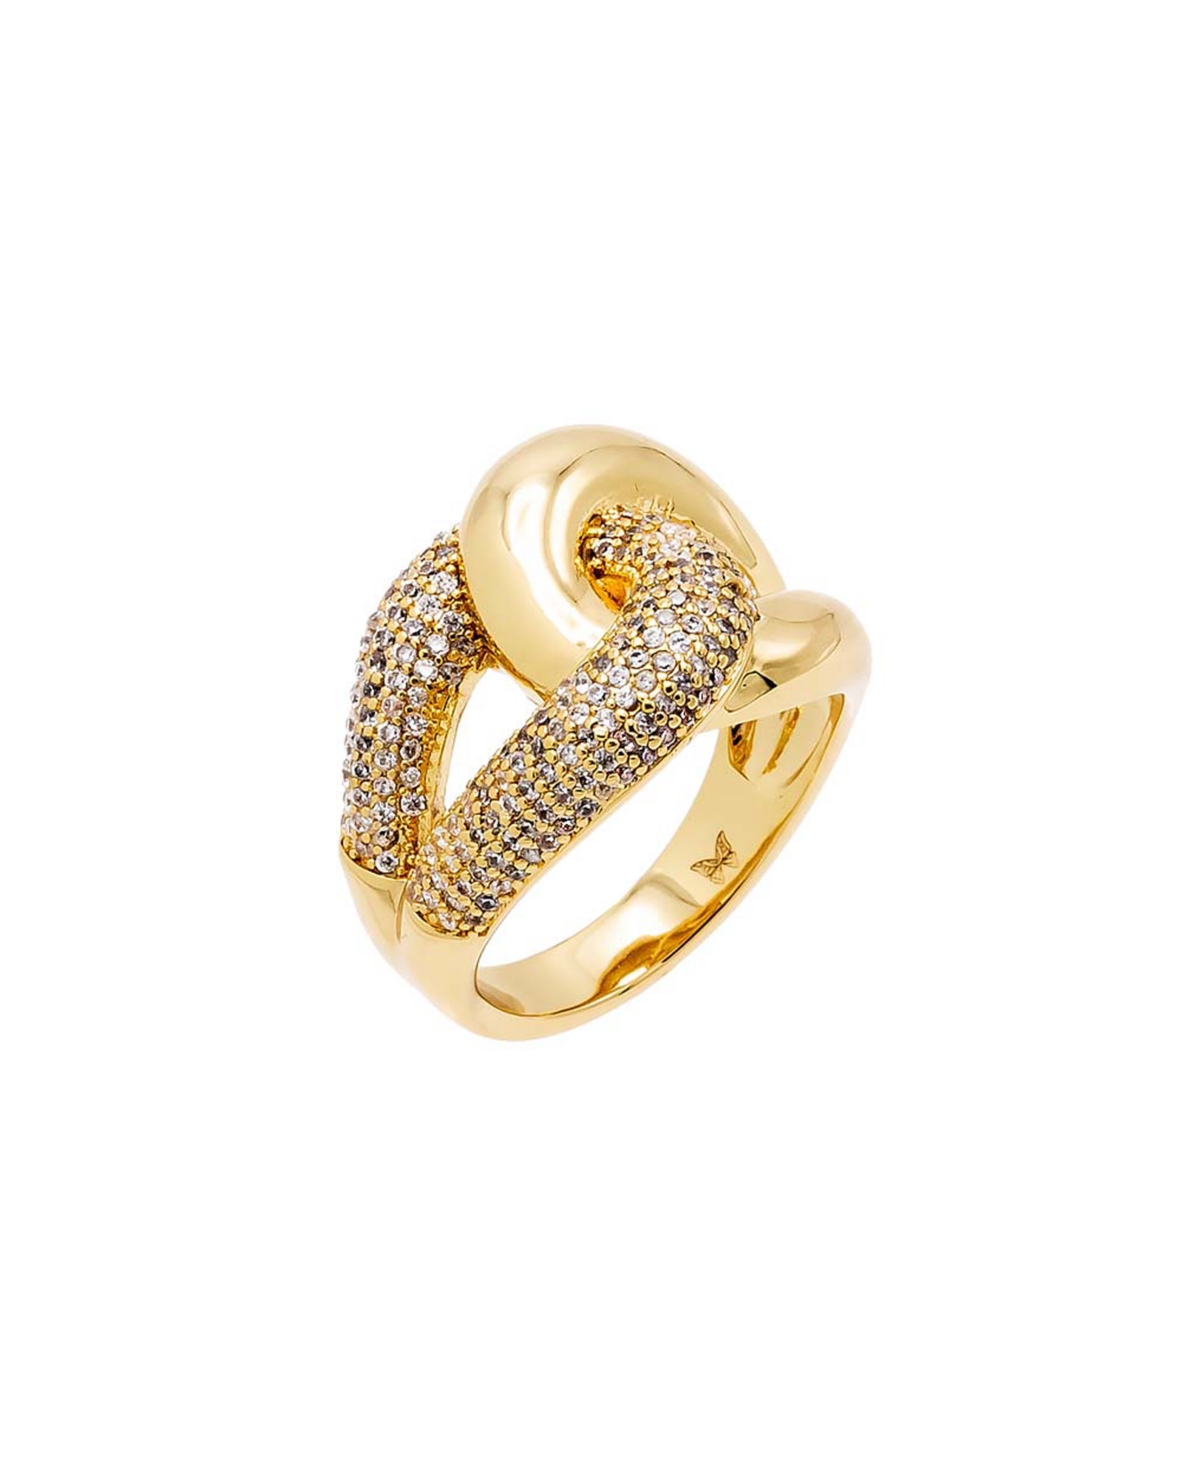 By Adina Eden Solid And Pave Intertwined Ring In Gold